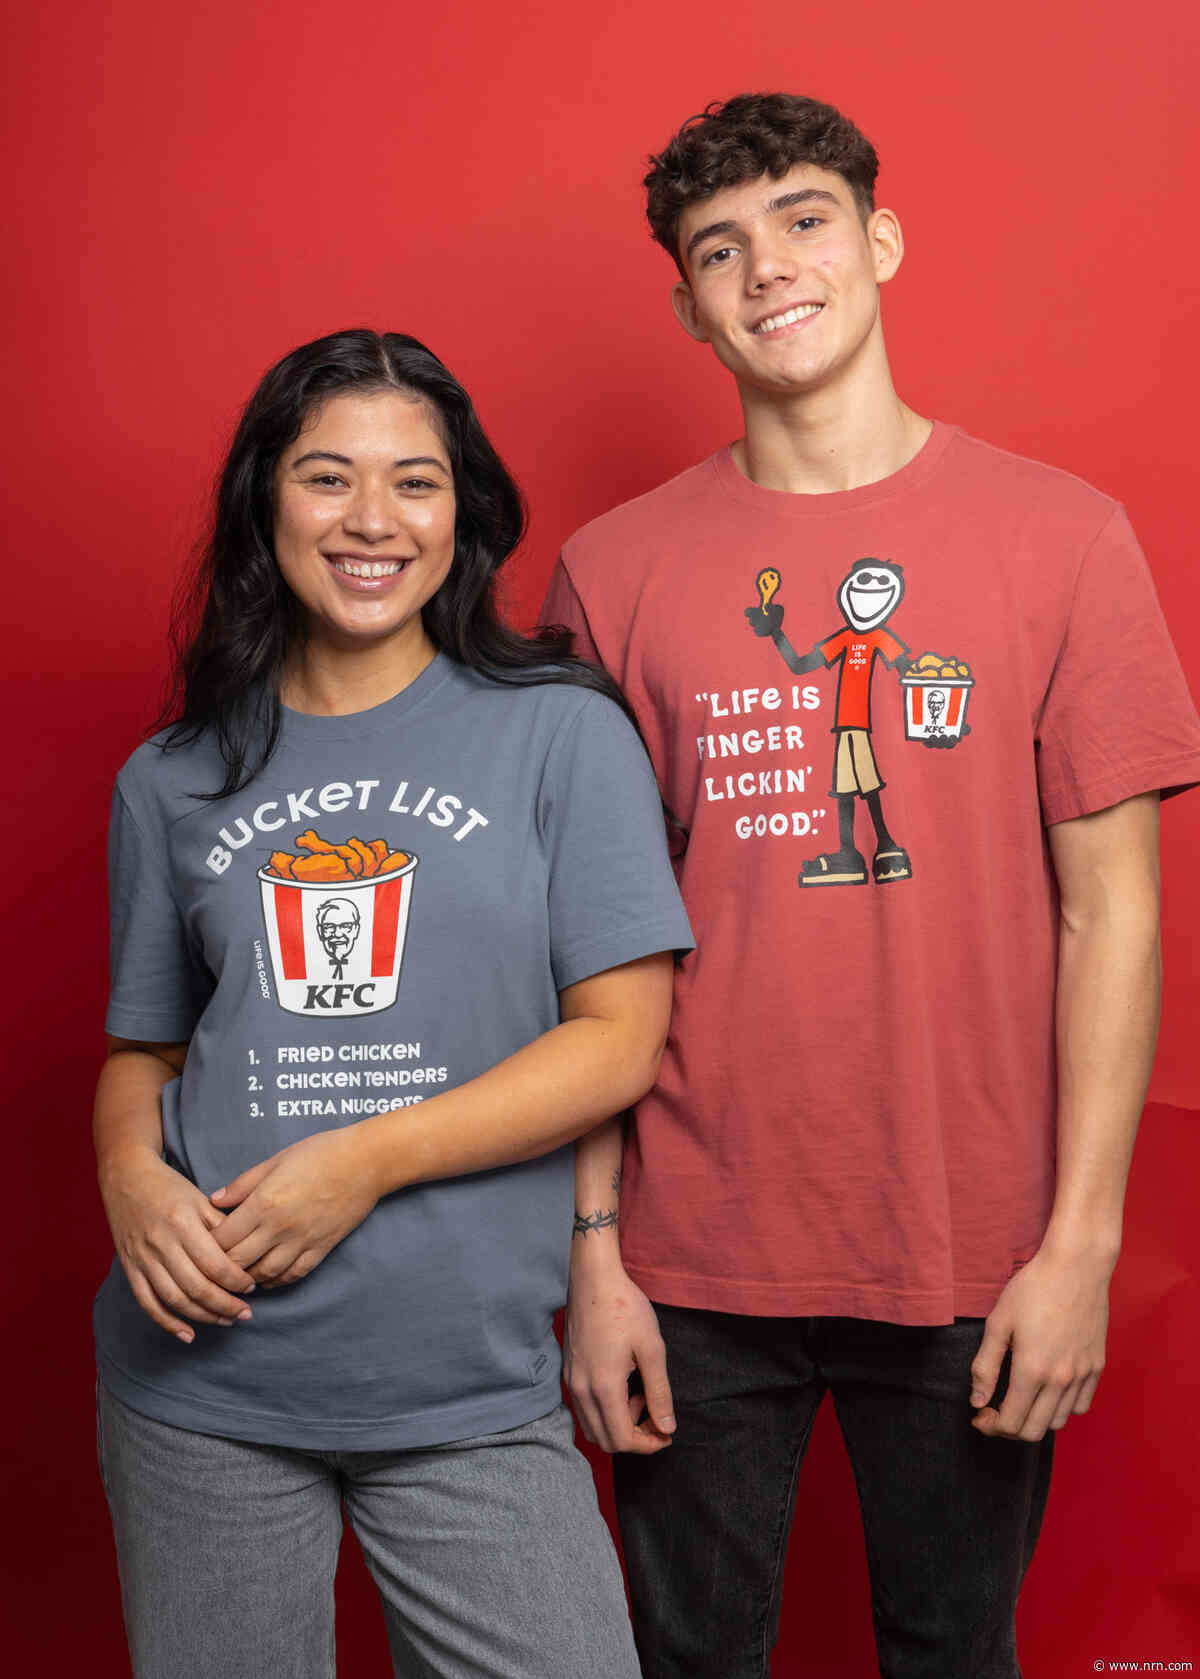 KFC teams up with Life Is Good for new merch line